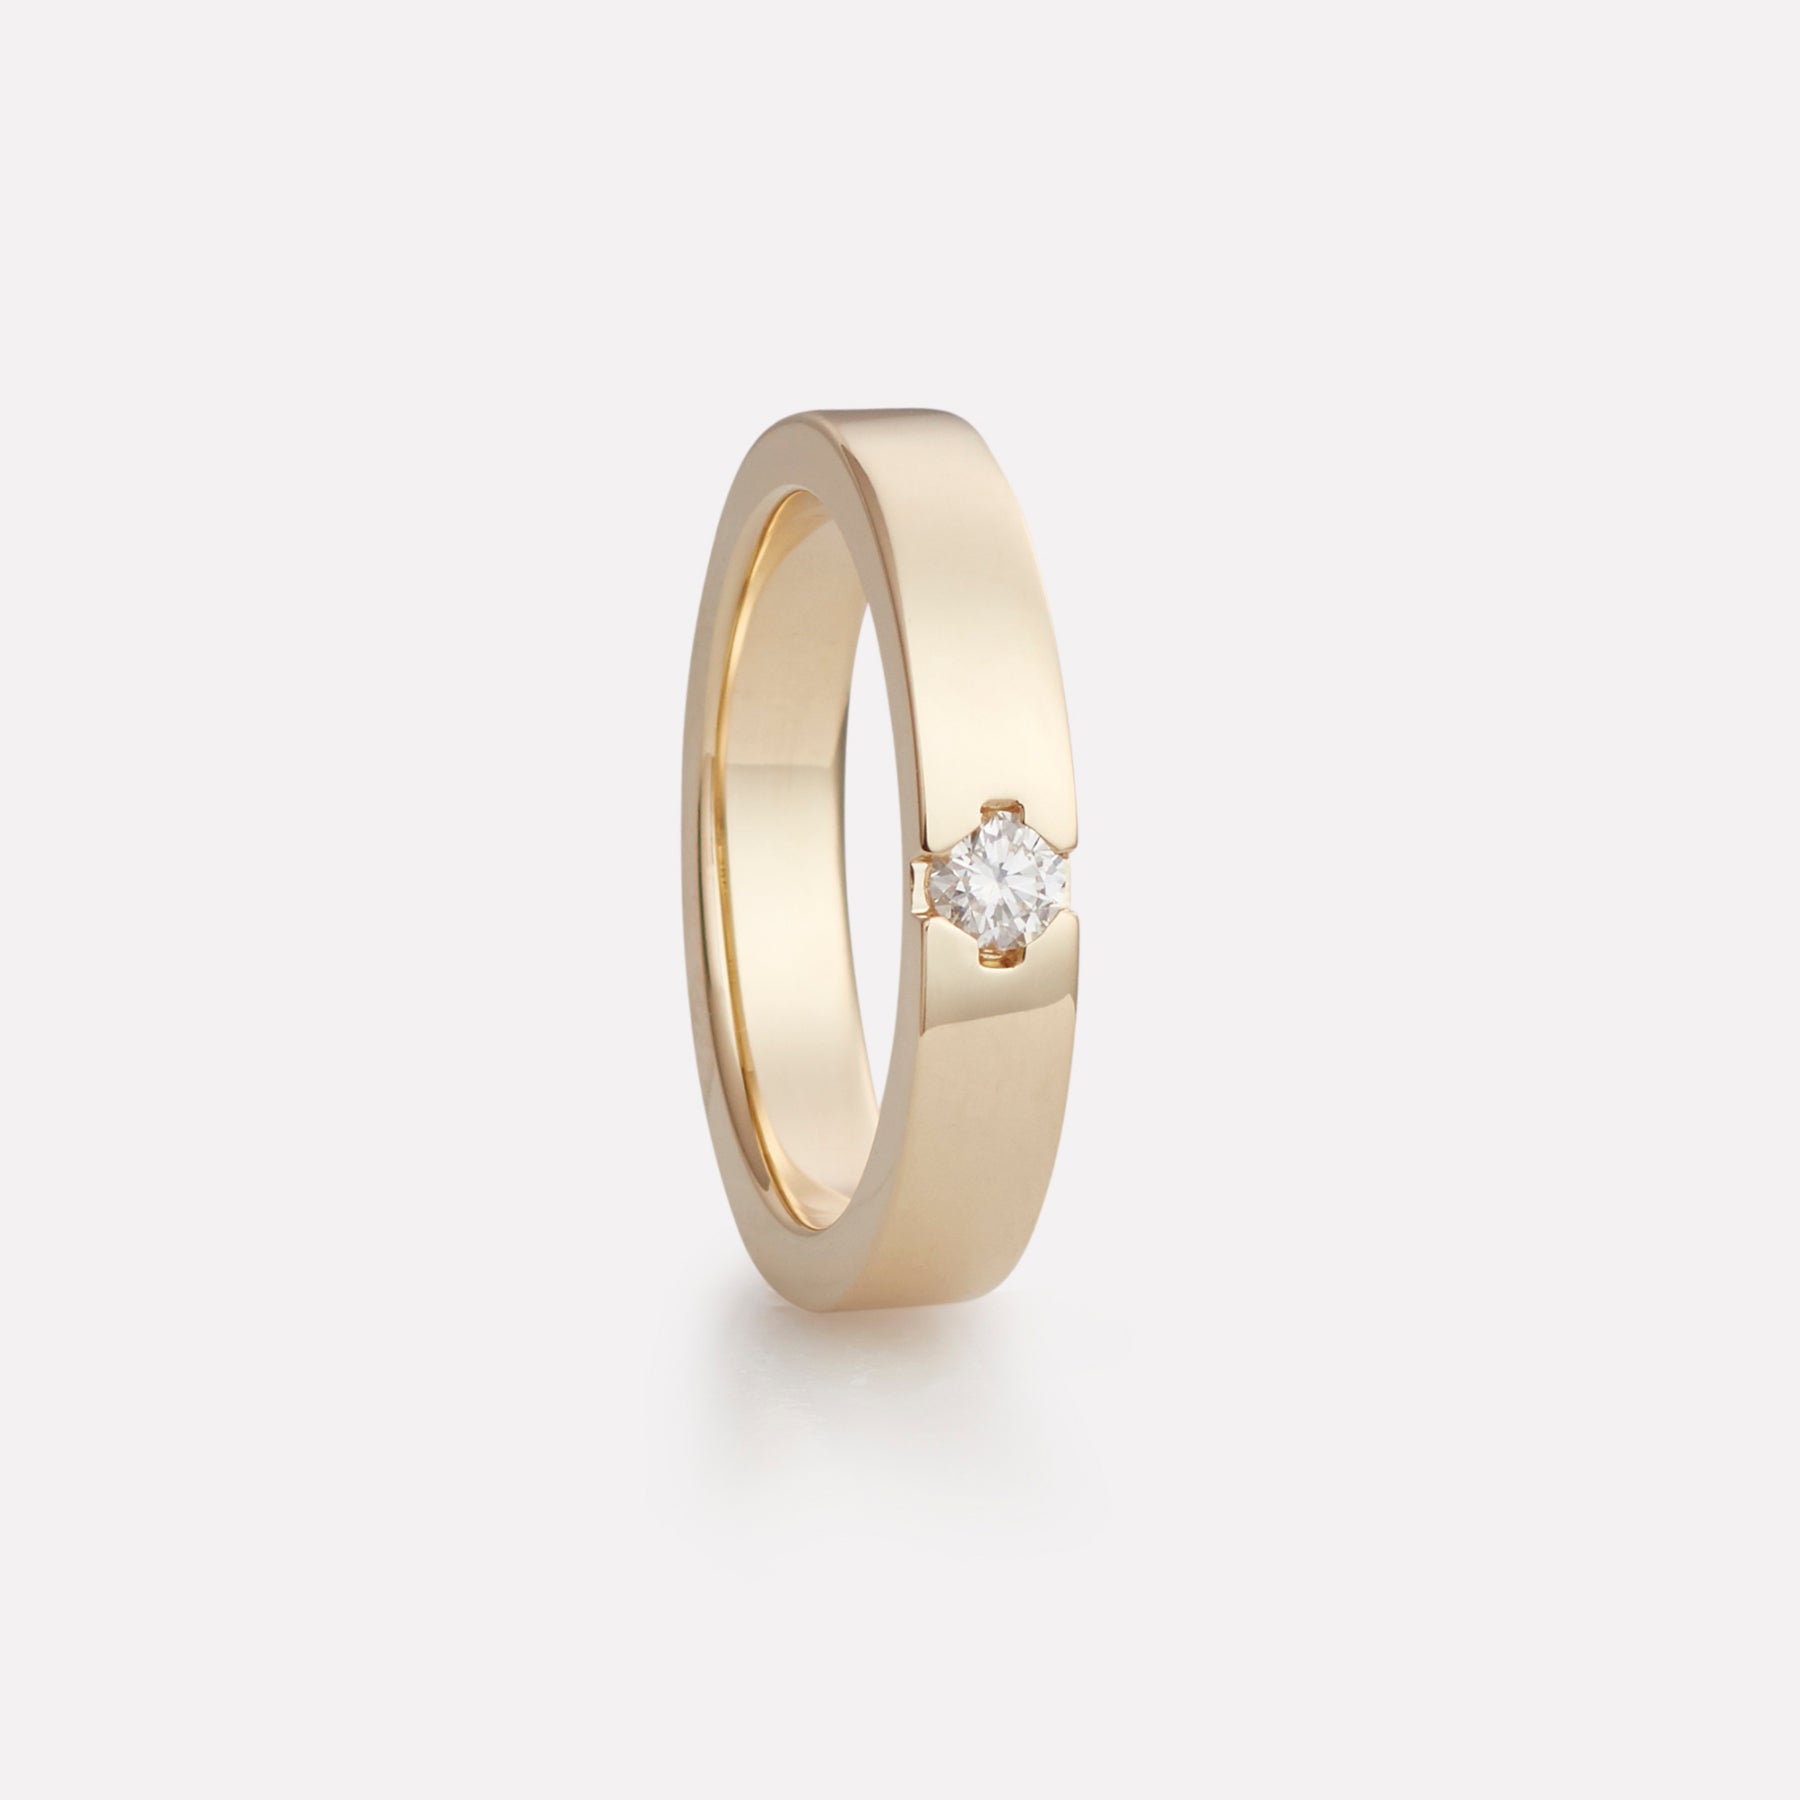 Majestic ring in yellow gold with diamond, ladies